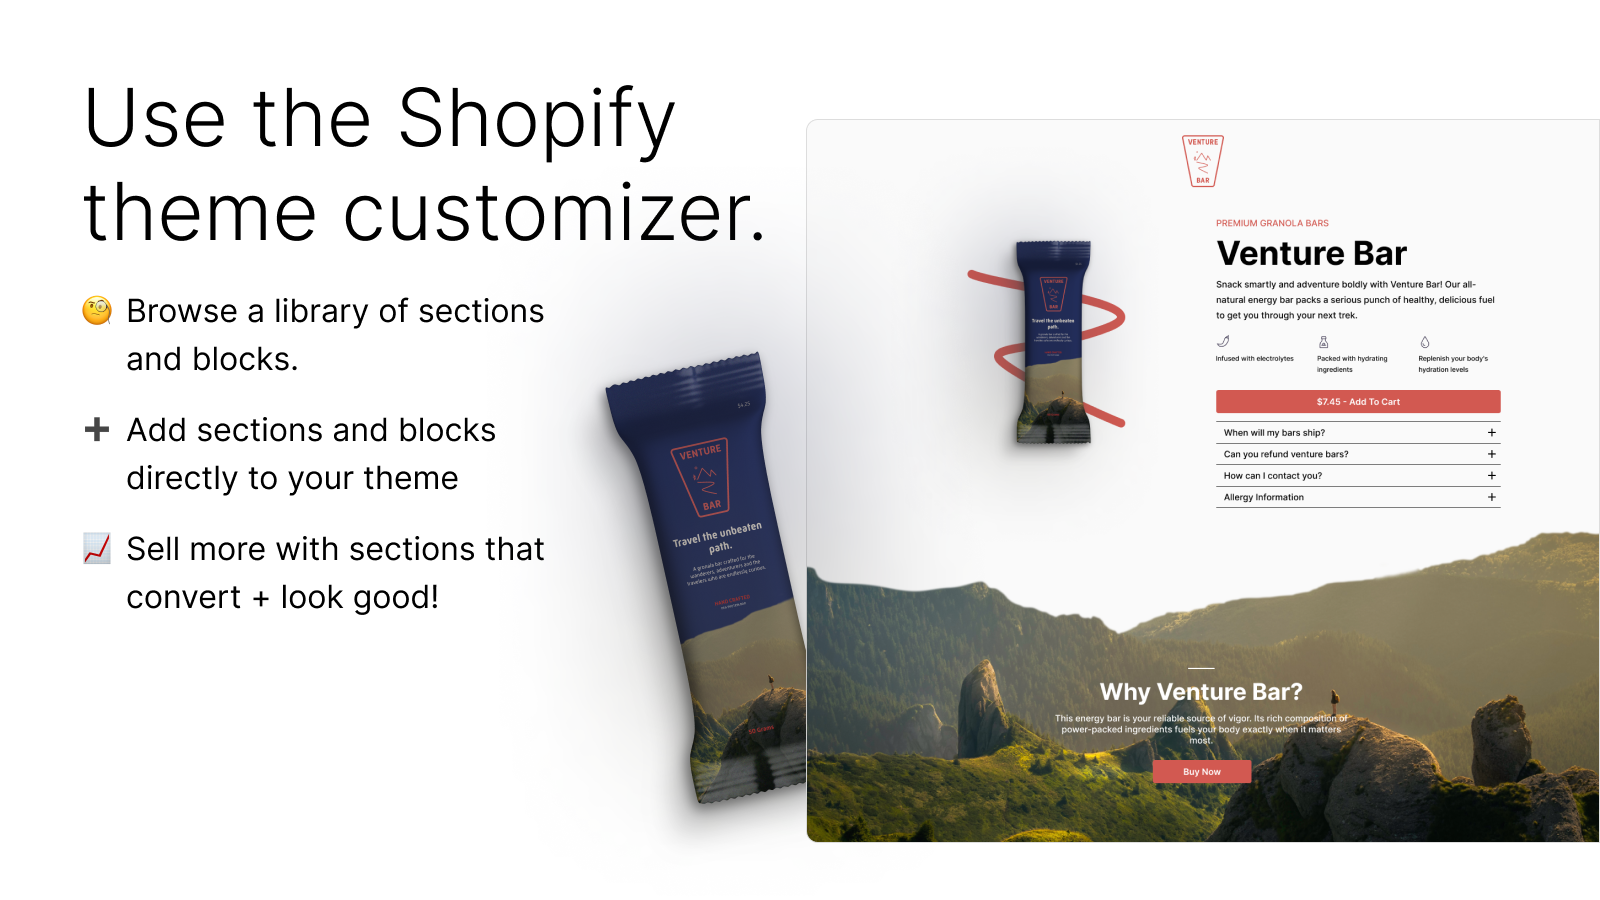 Use the Shopify theme customizer.